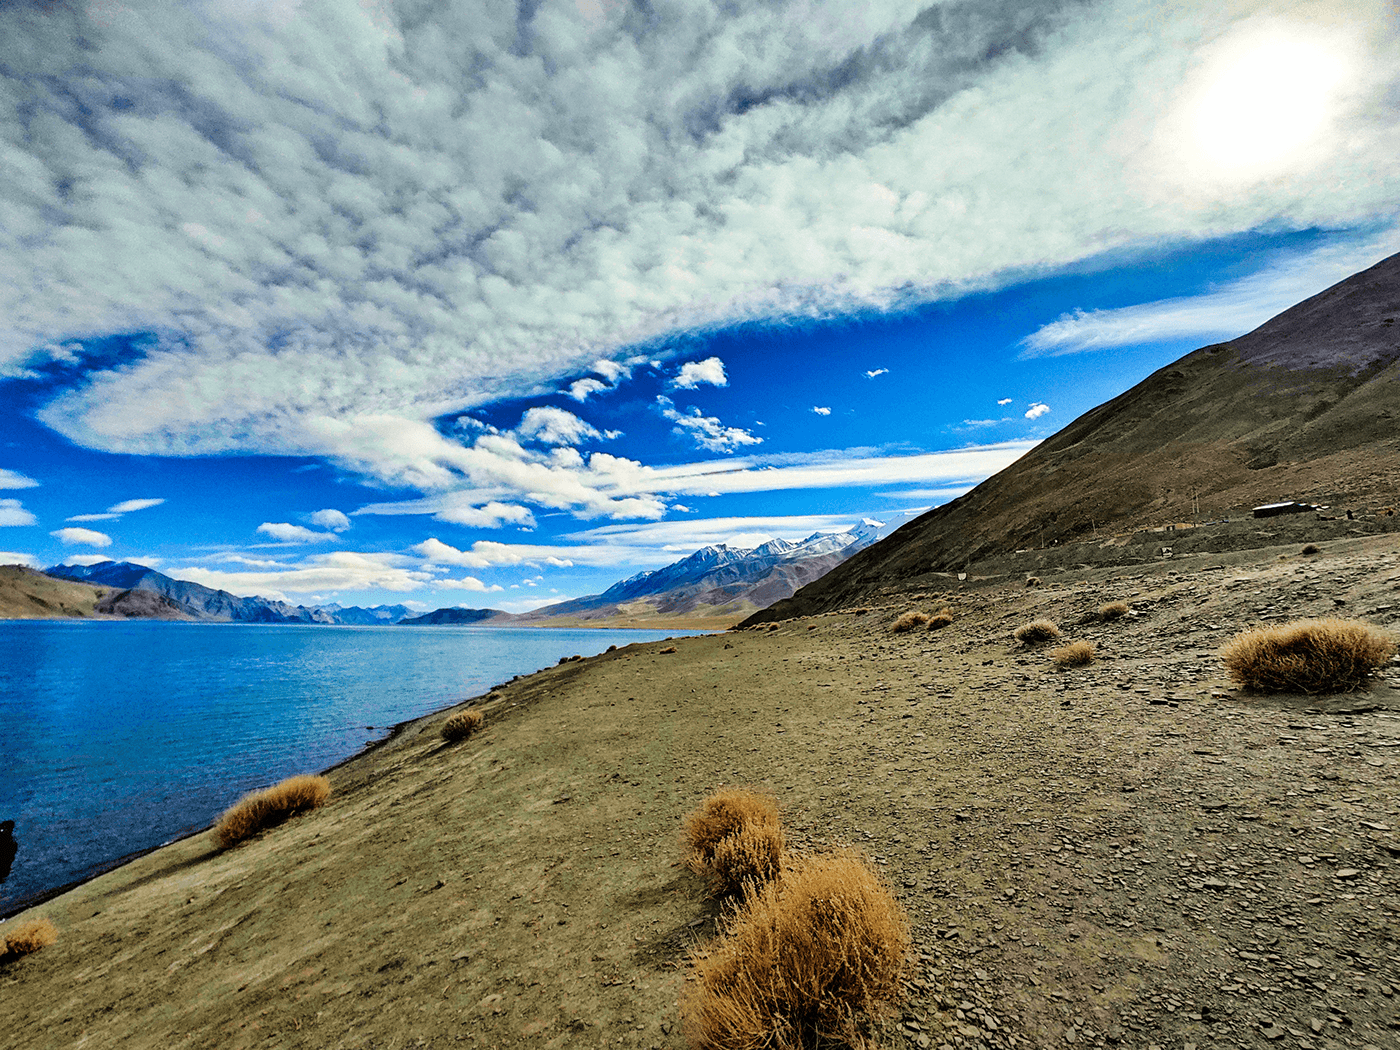 Photography  mobilephotography Landscape SKY clouds mountains Travel India ladakh